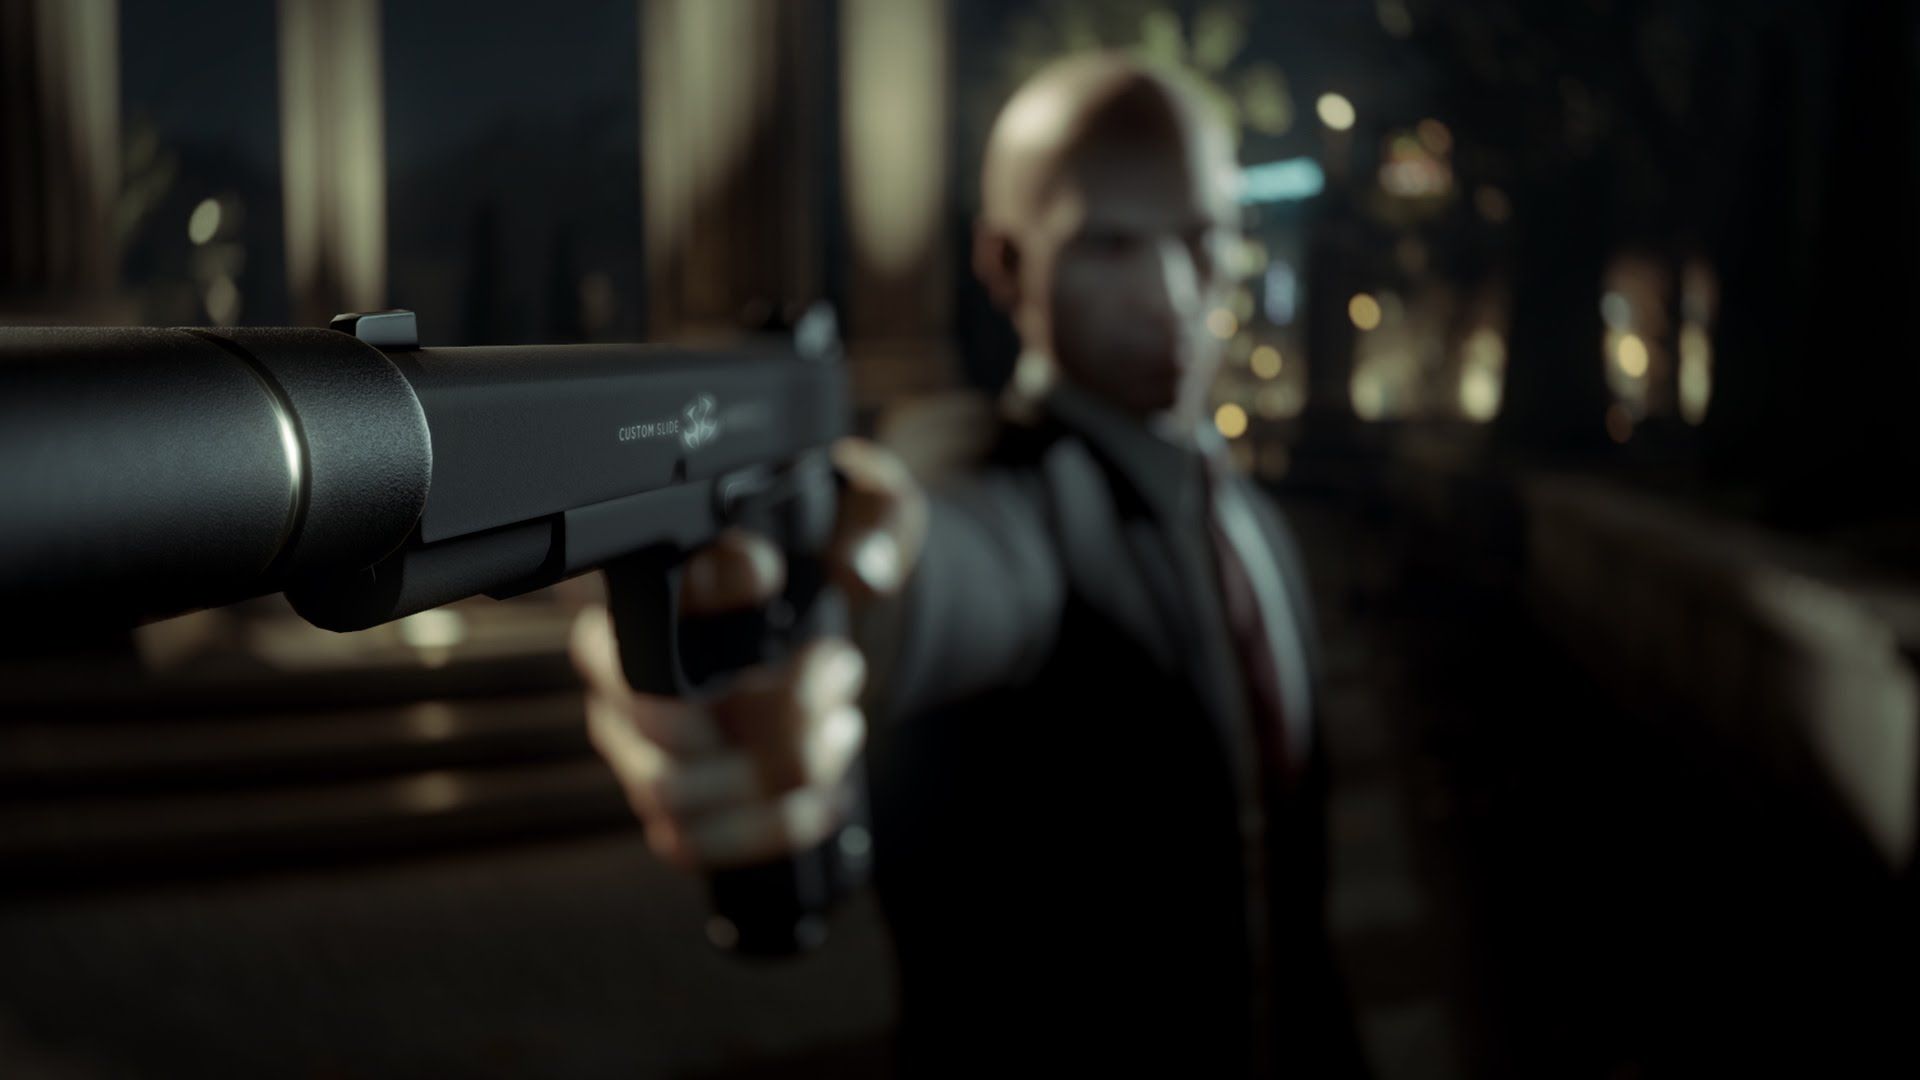 Hitman PC 1.03 Patch Improves DX12 Performance, Adds New Challenges And More